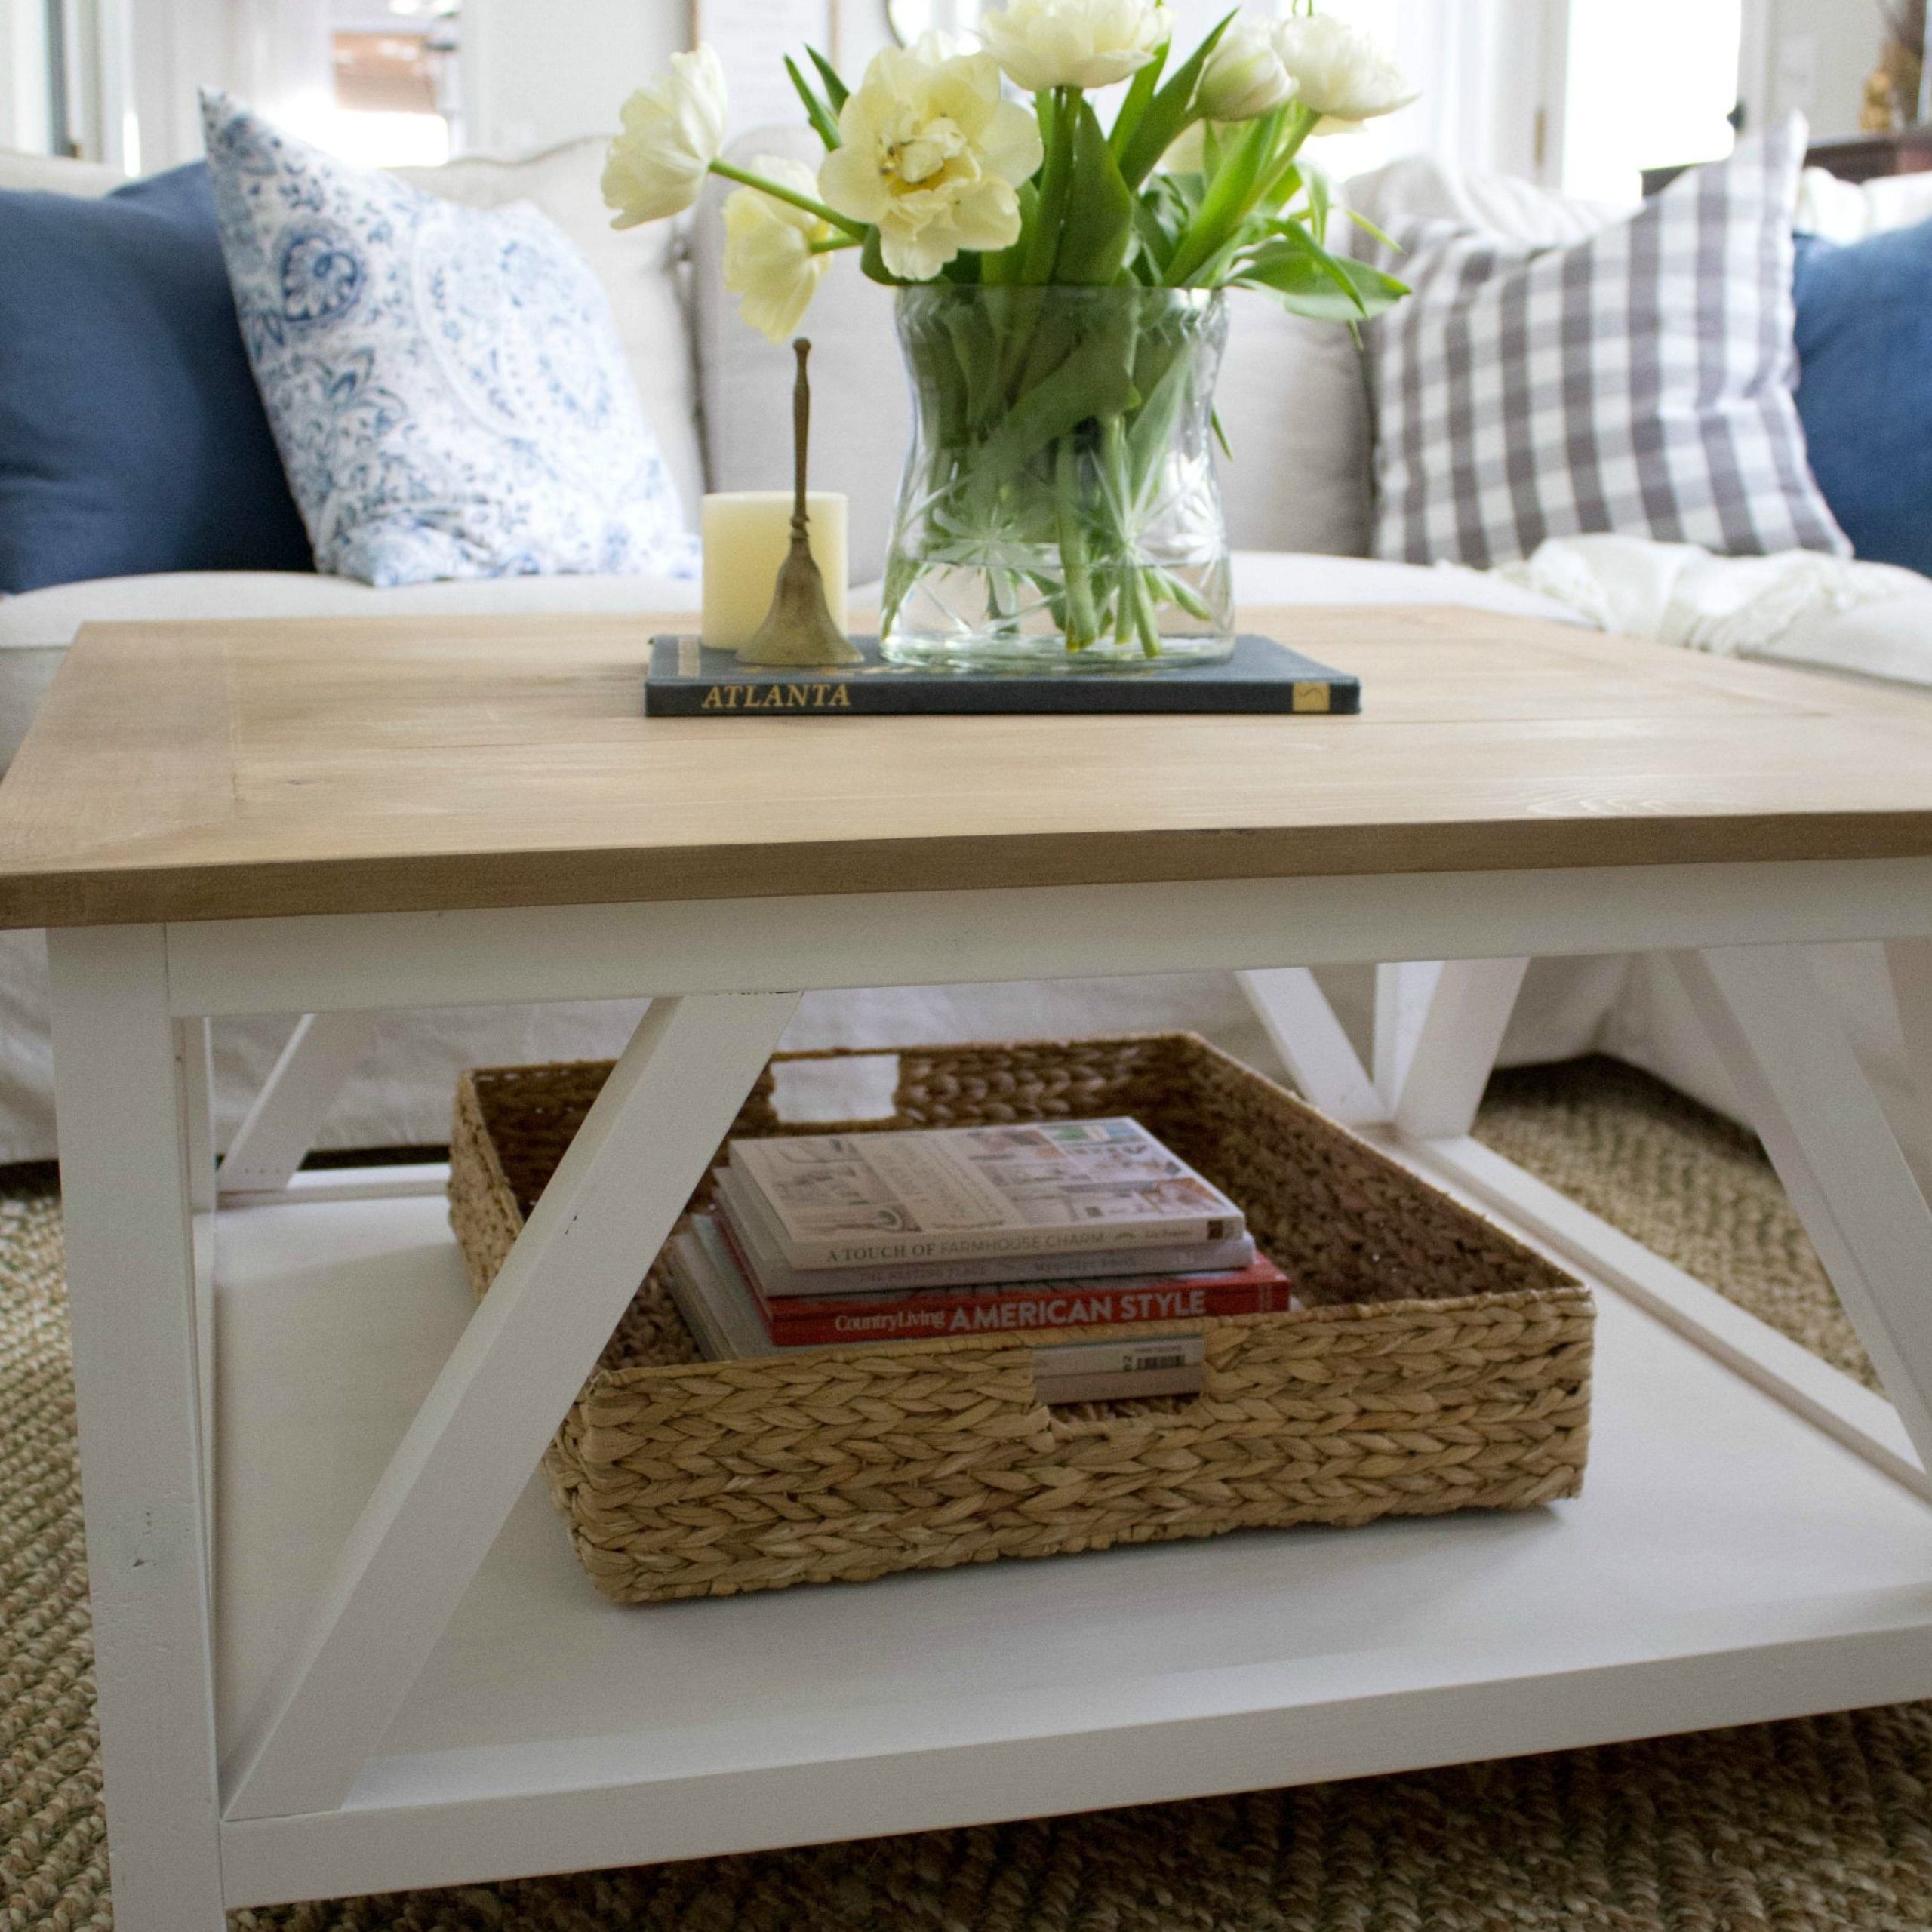 Luxus Modern Farmhouse Coffee Table Ideas – Home Inspiration With Regard To Coffee Tables For 4 6 People (Gallery 17 of 20)